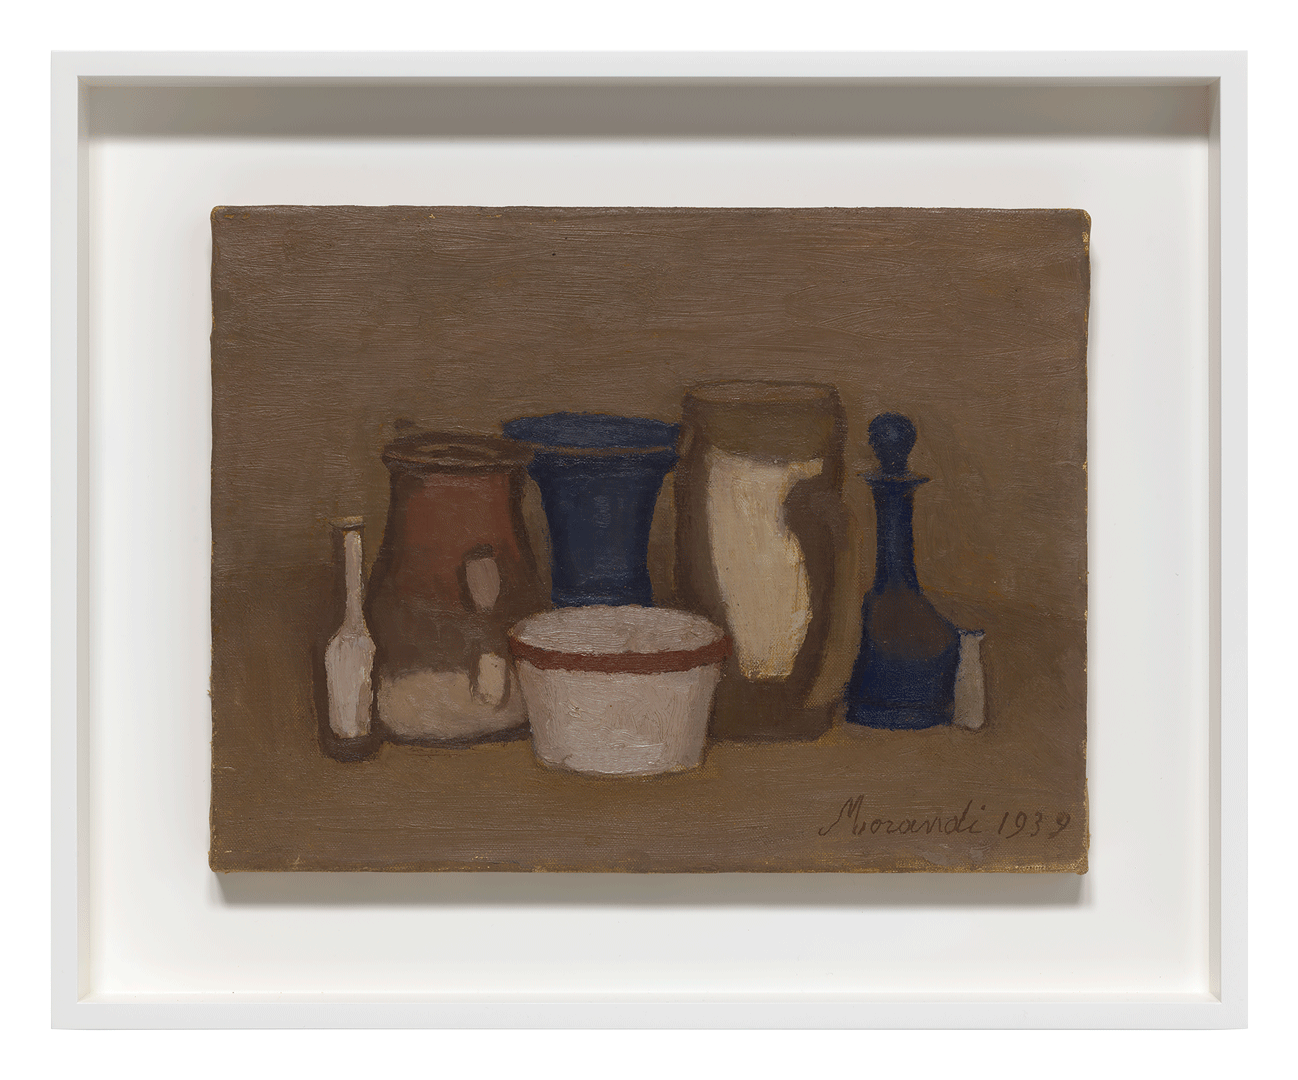 An oil painting on canvas by Giorgio Morandi, titled Natura morta (Still Life), dated 1939.